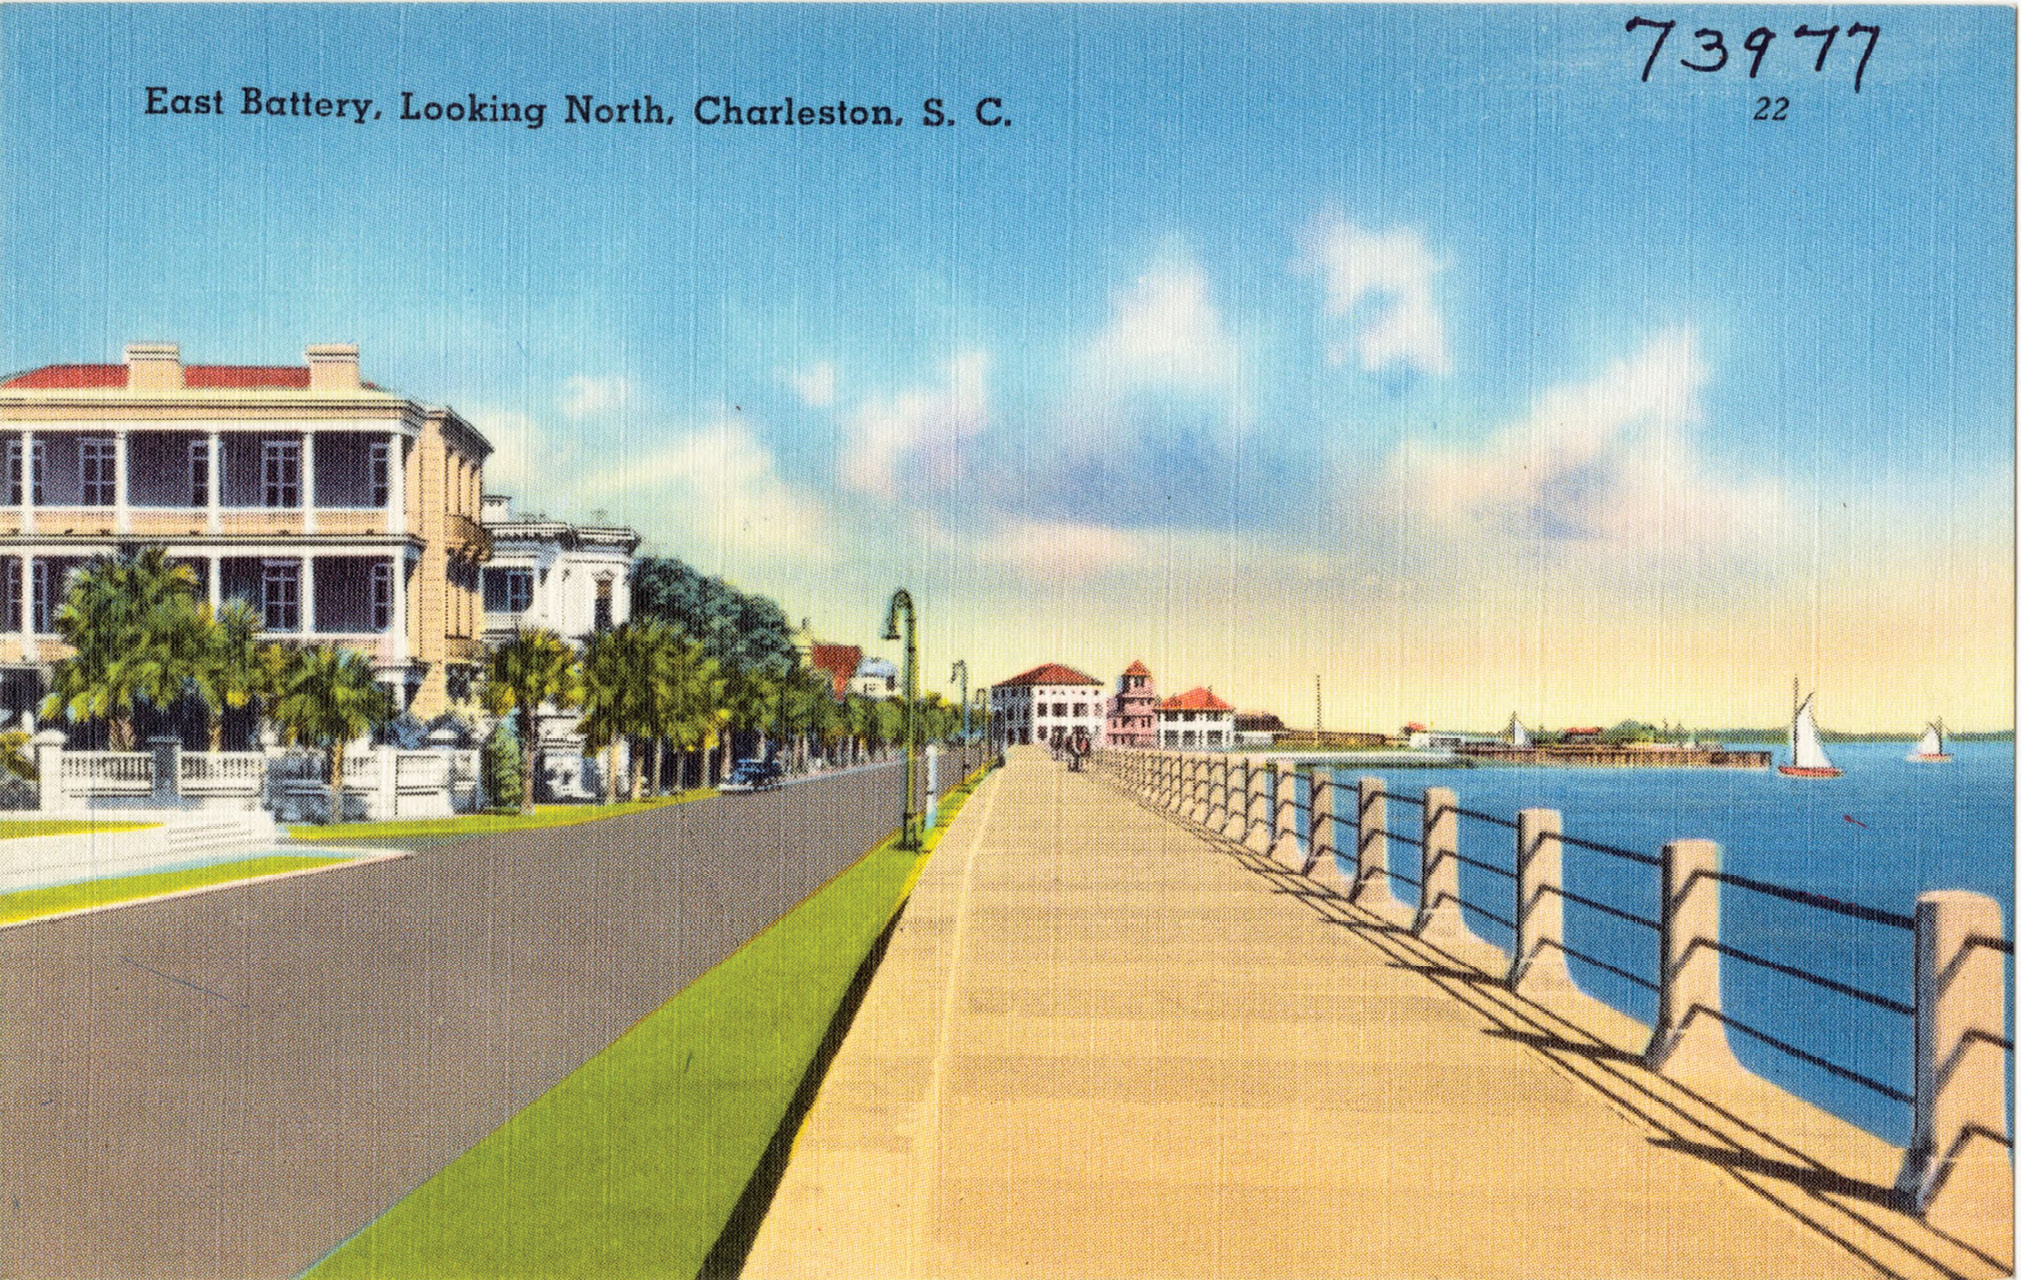 East Battery, Looking North: “The Battery is a beautiful drive along a 1,500-foot seawall. It overlooks Charleston Harbor, offering a marvelous view of the historic harbor fortifications, and beyond the Atlantic Ocean.”